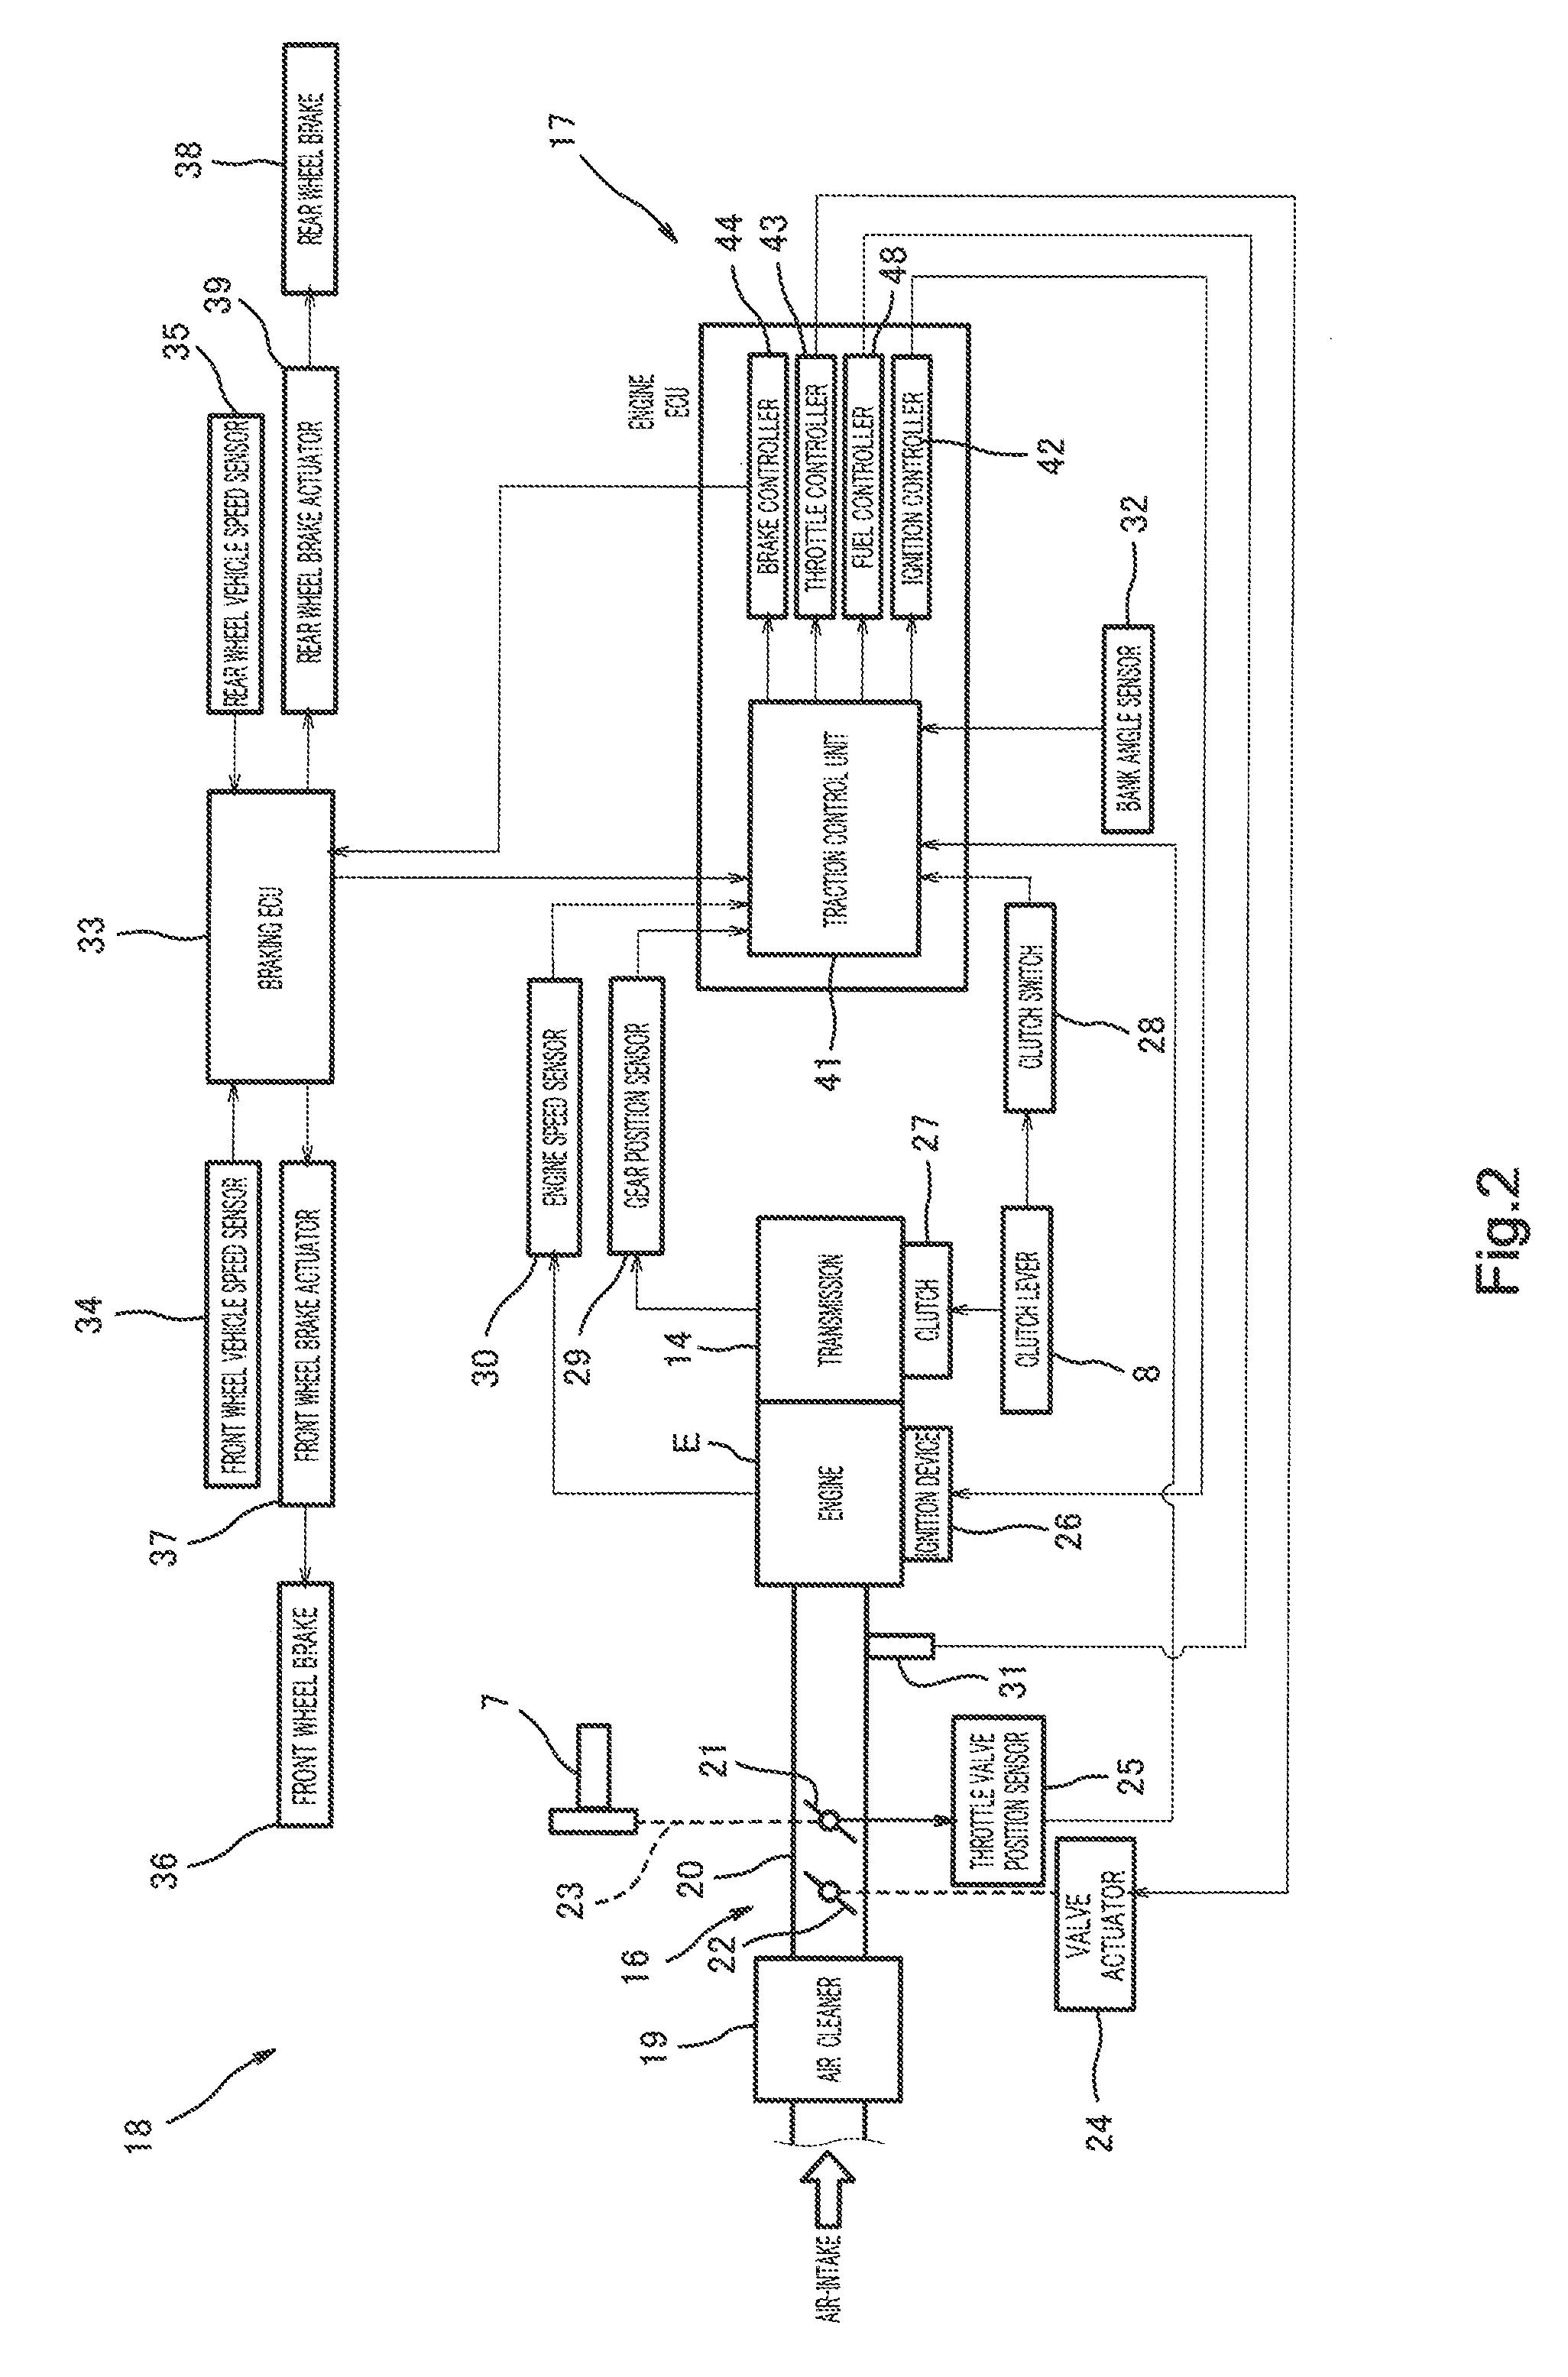 Traction Control System in a Vehicle, Vehicle Including Traction Control System, and Traction Control Method